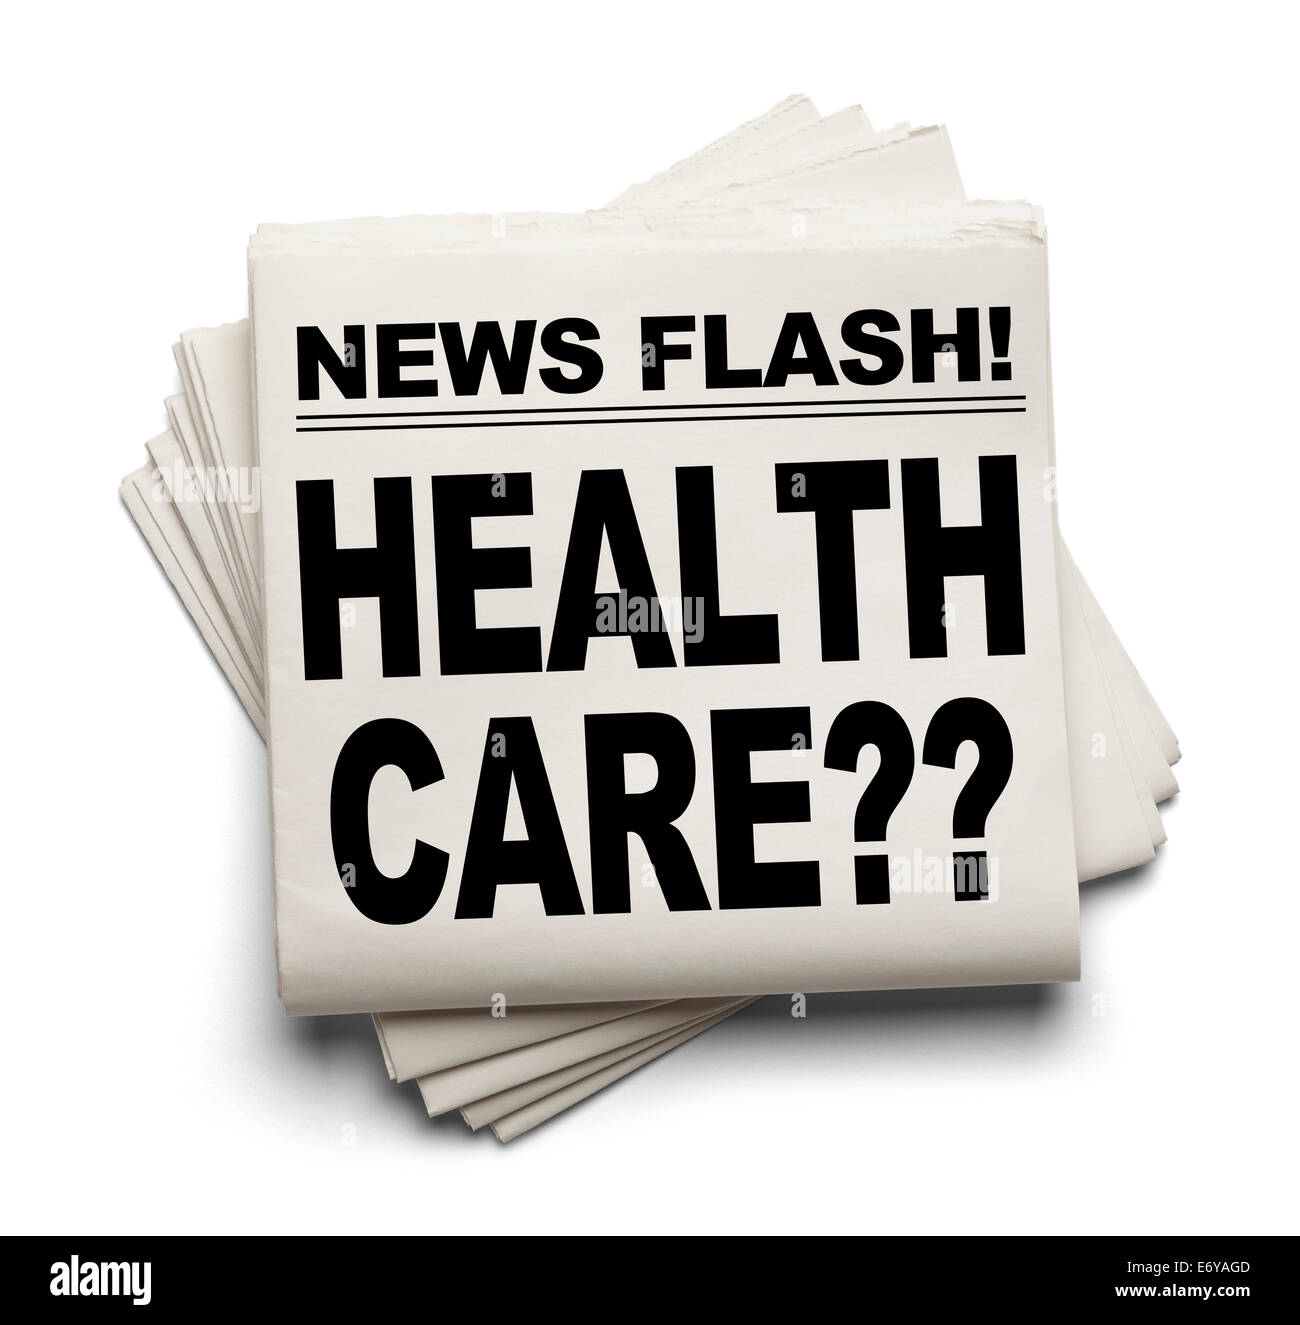 News Flash Health Care? Zeitung, Isolated on White Background. Stockfoto